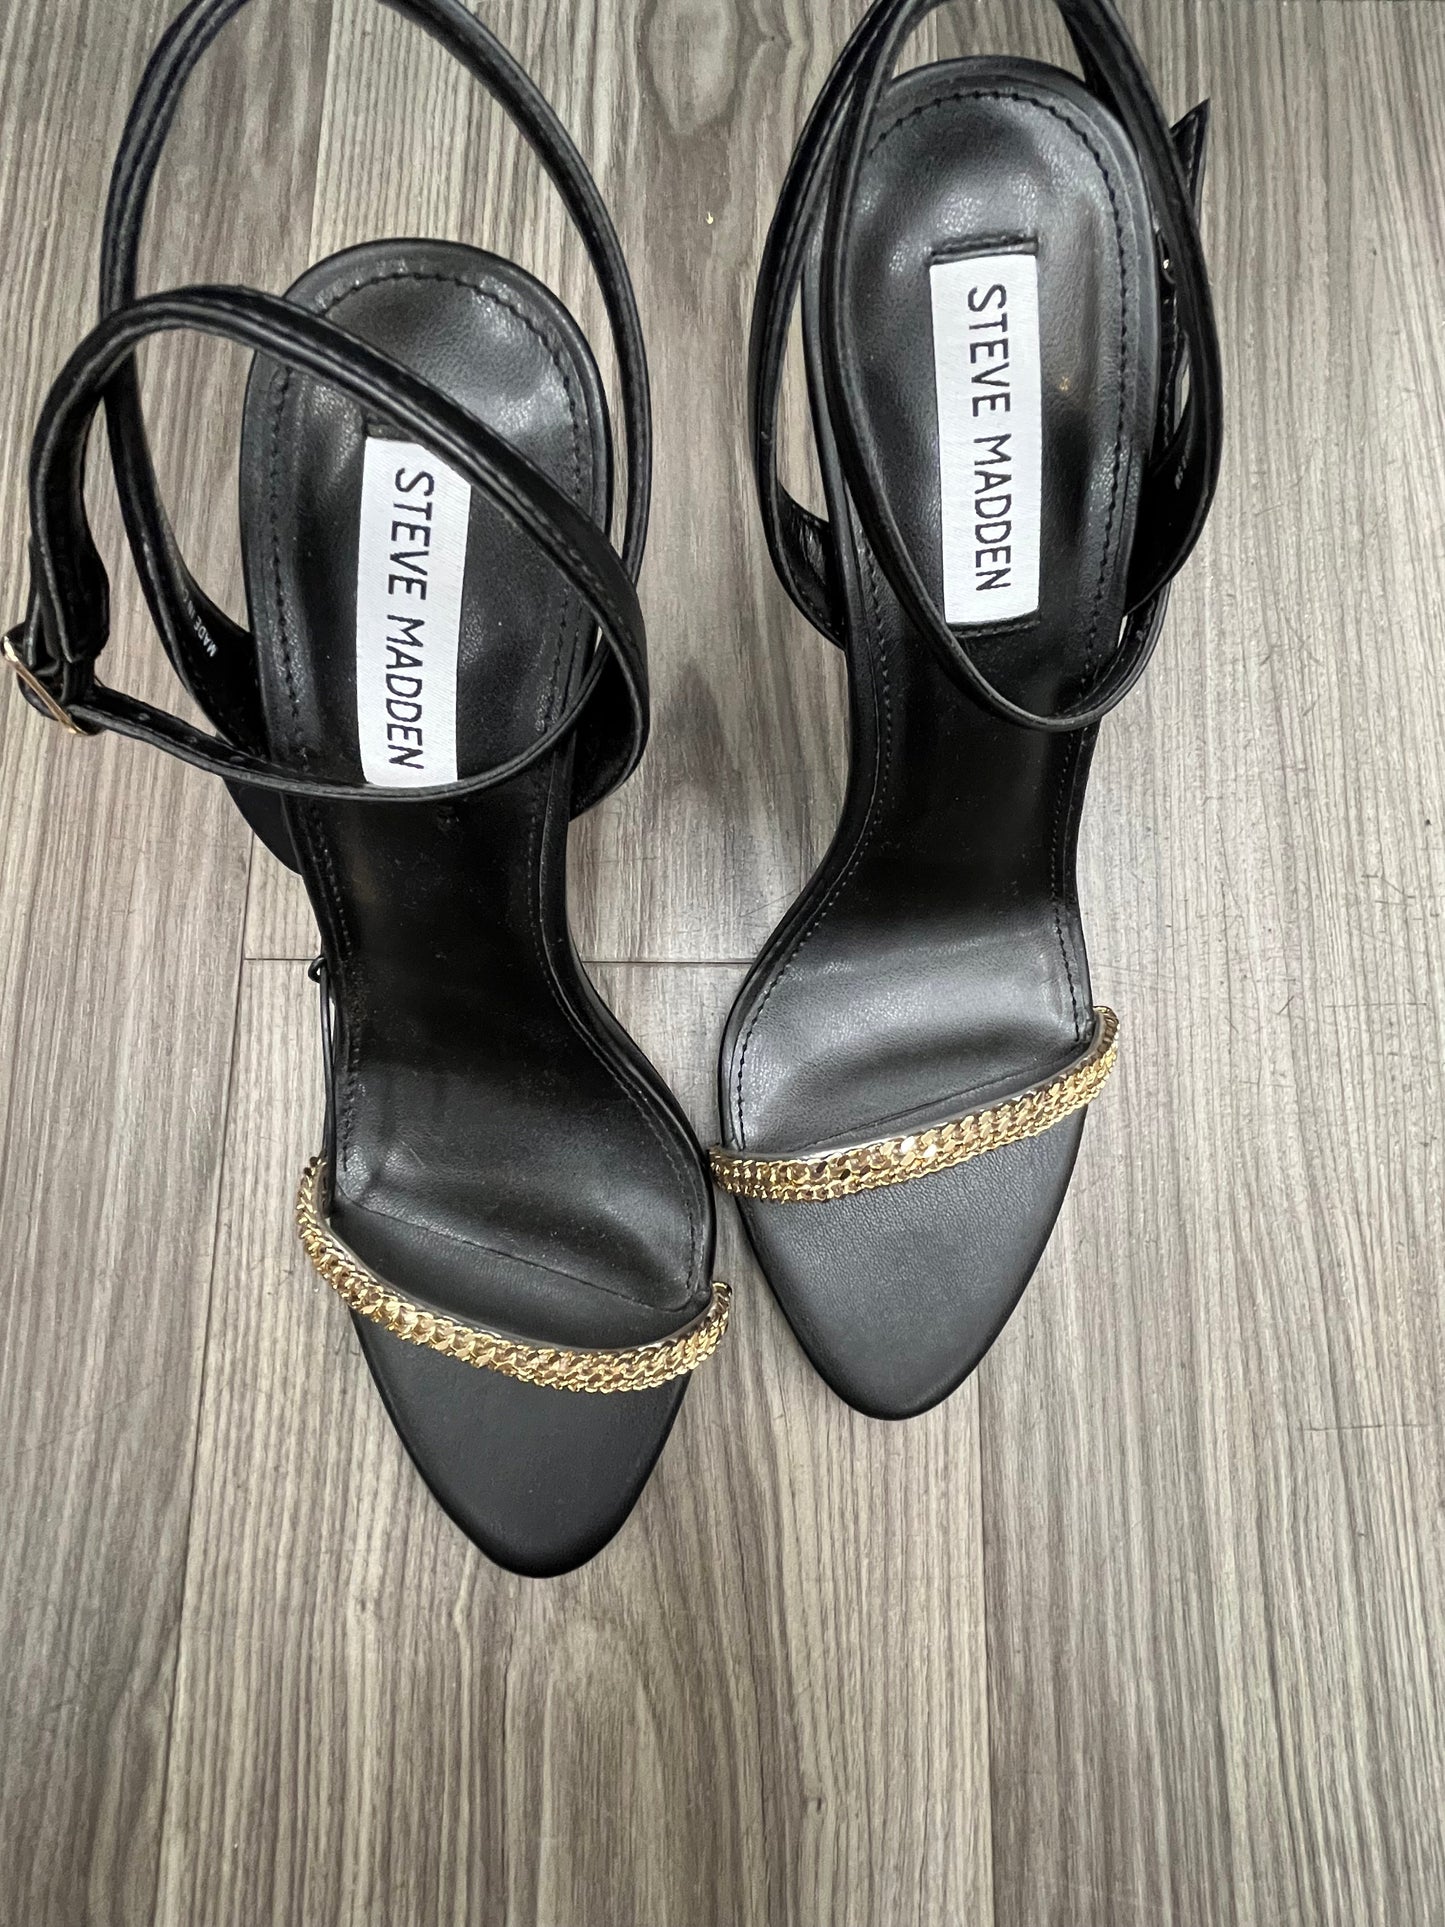 Shoes Heels Stiletto By Steve Madden  Size: 8.5